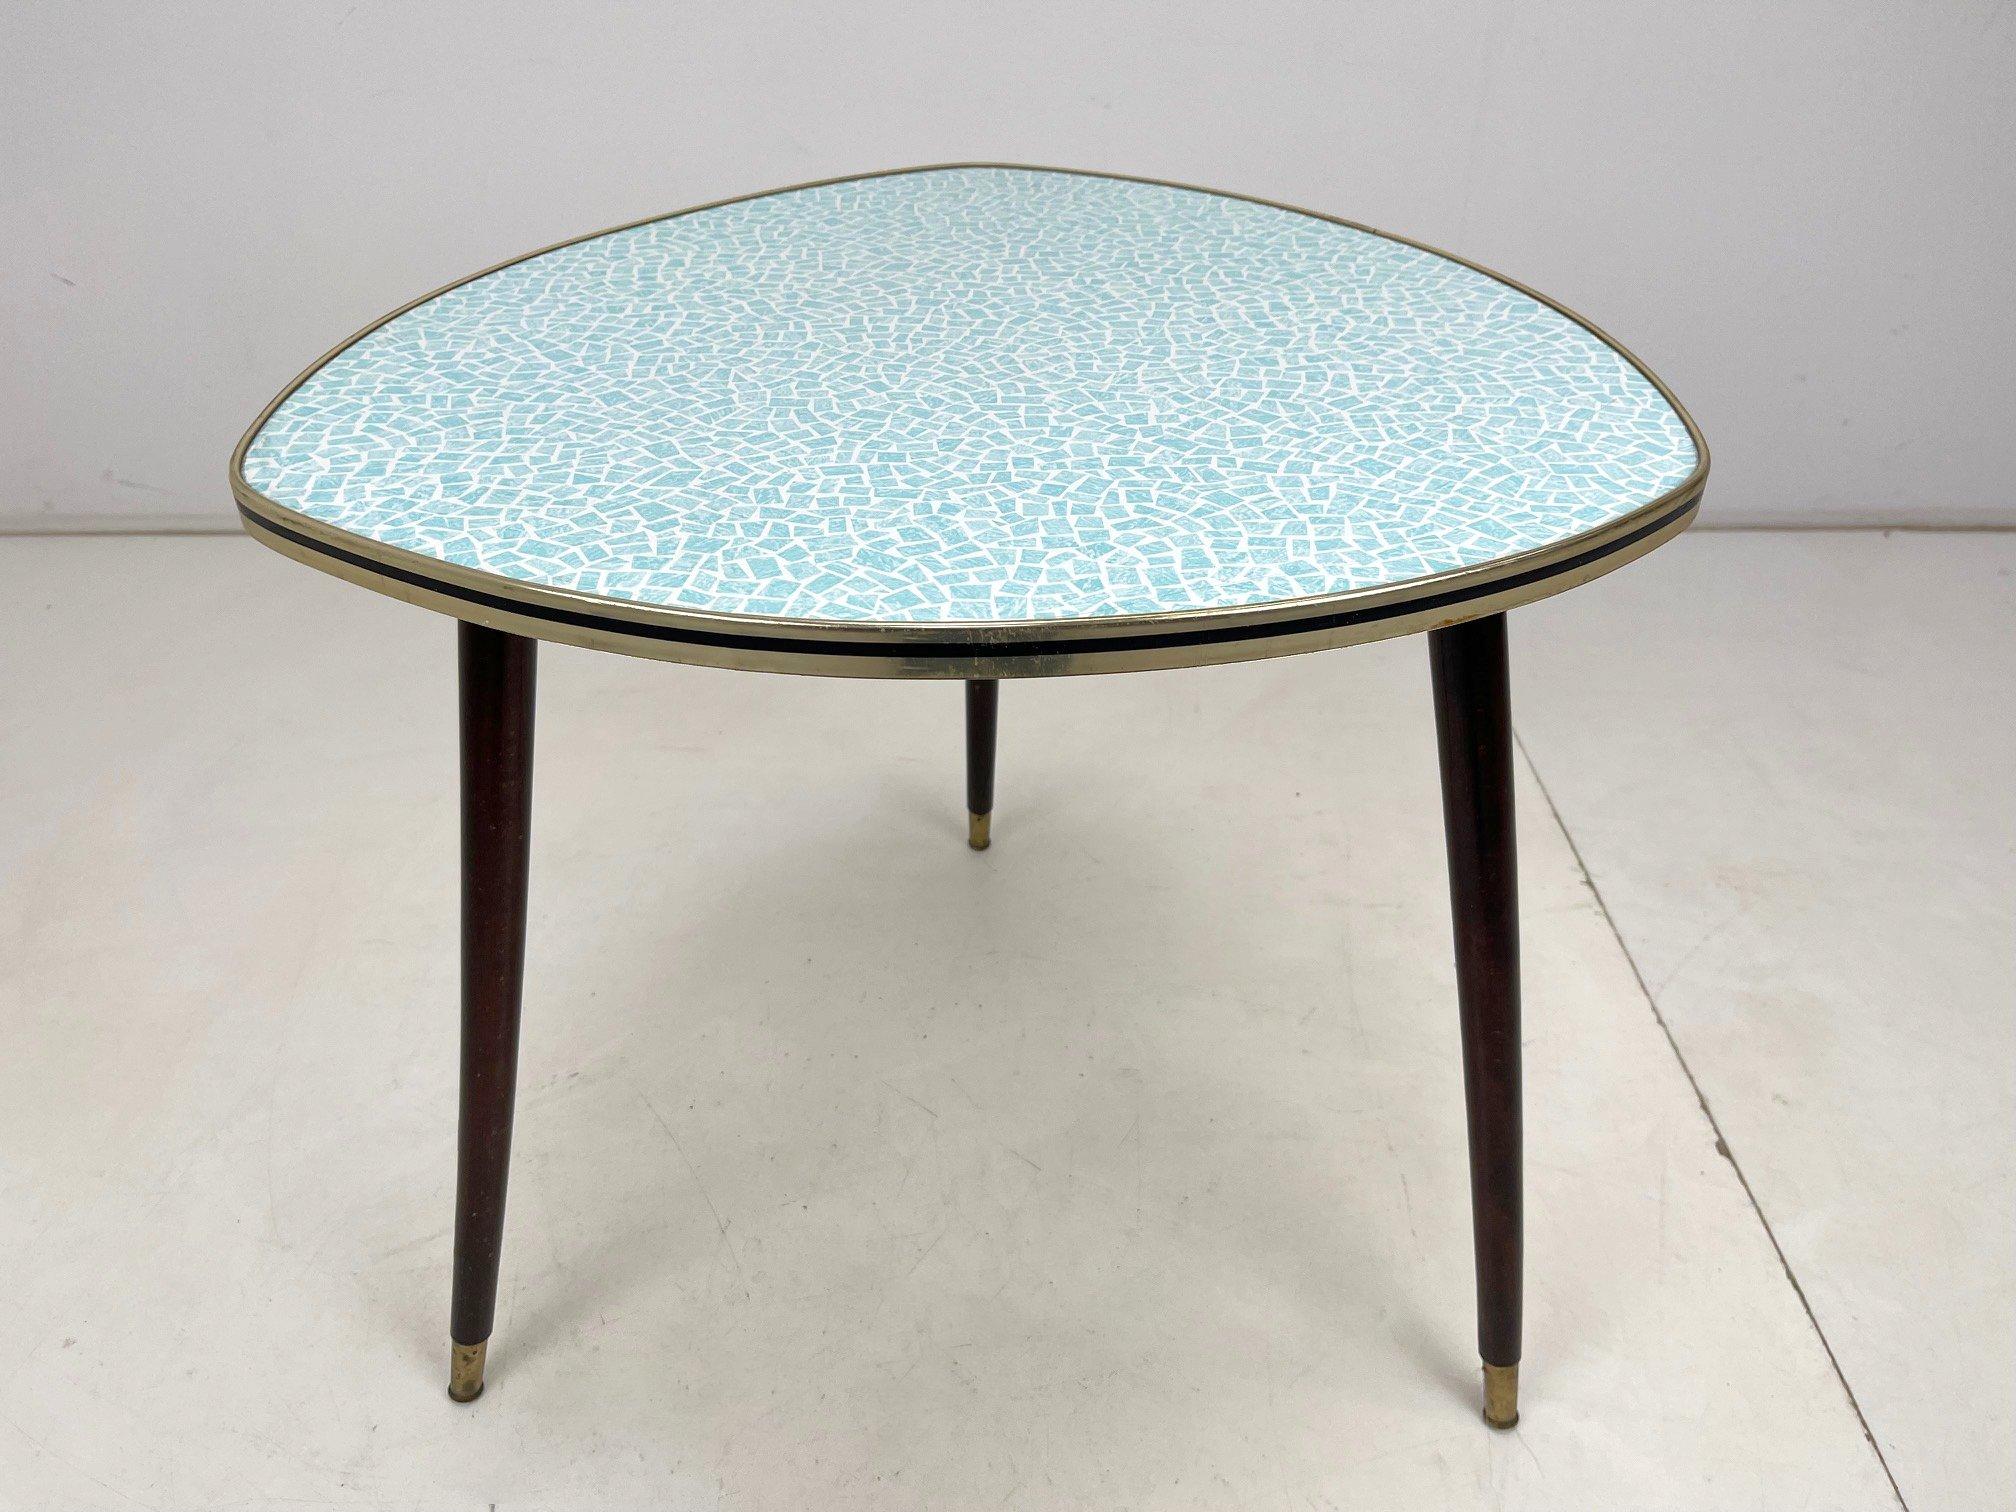 Vintage coffee table produced in Germany in the 1960's to 1970's.